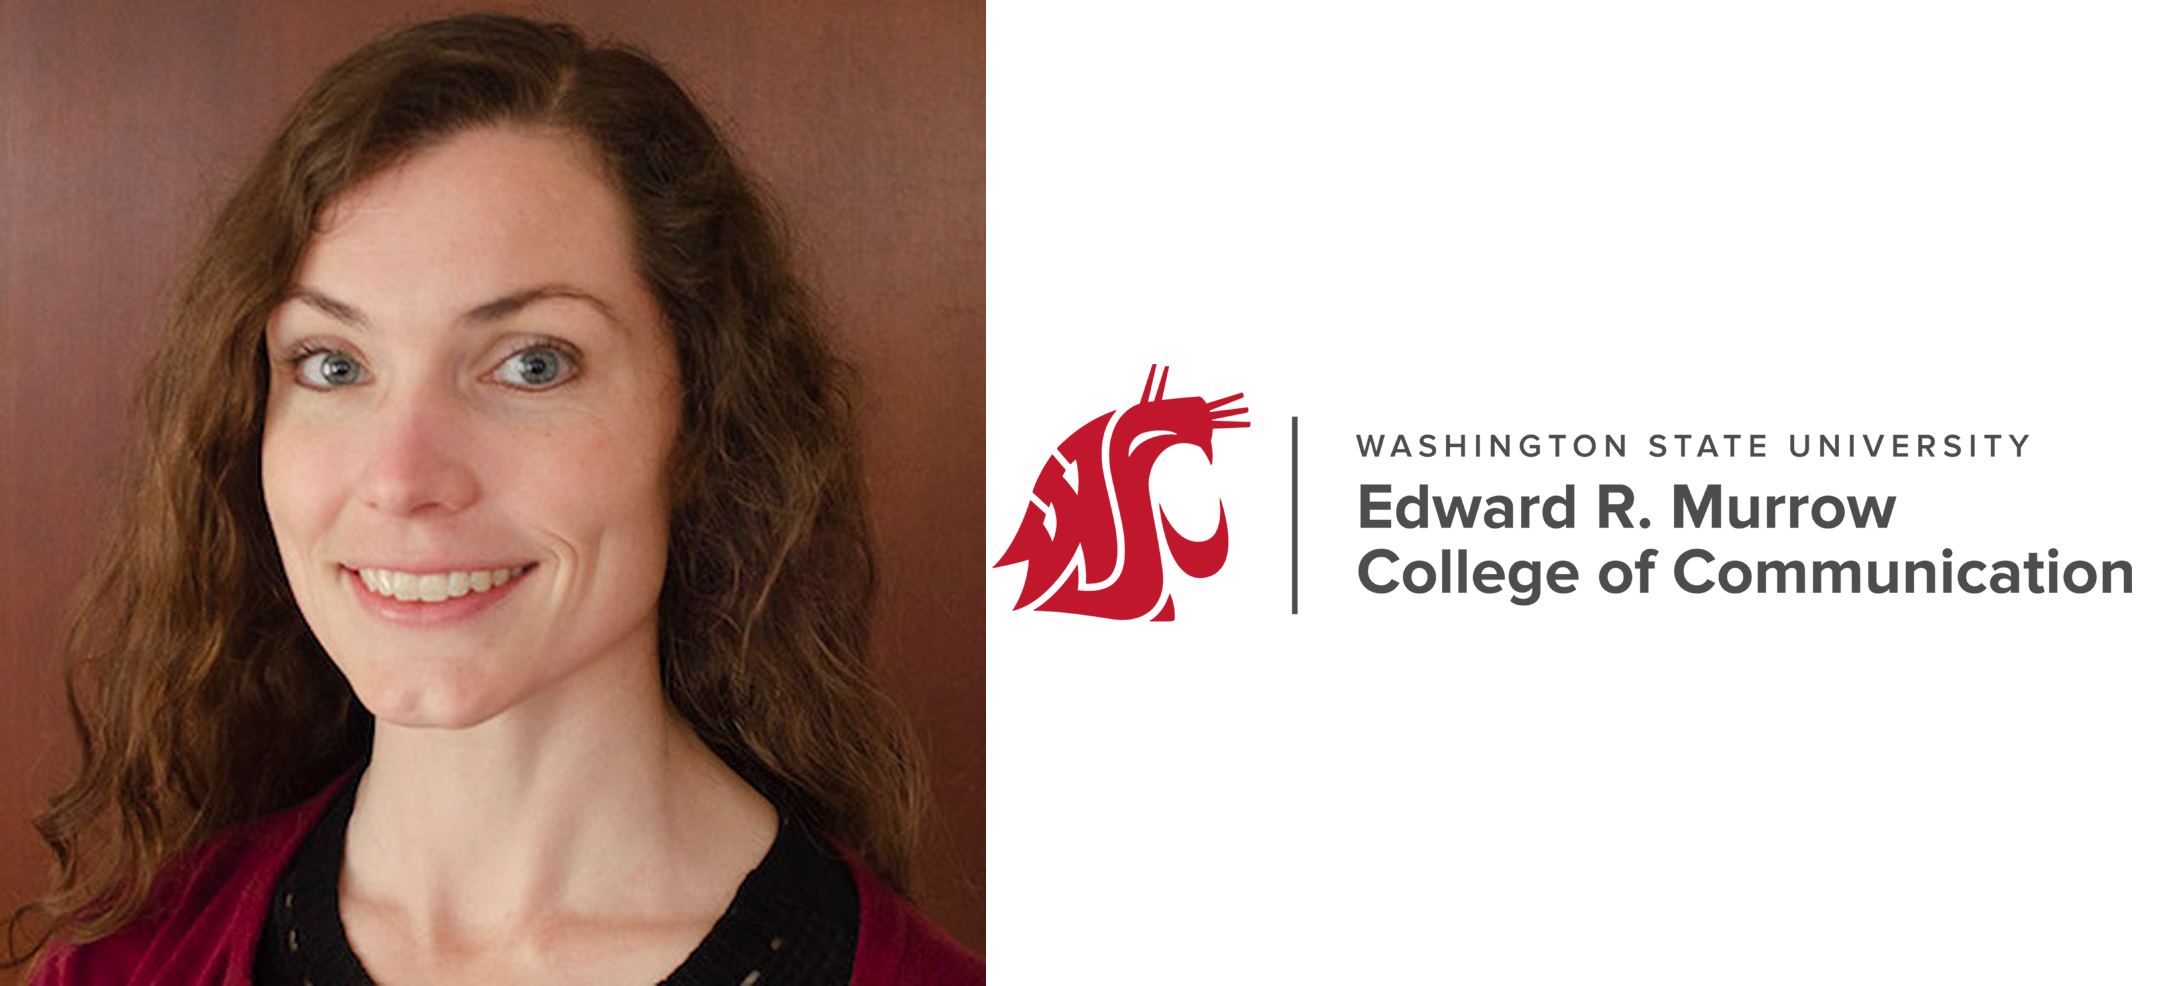 Headshot photo of a woman on the left, logo for the Murrow School at Washington State on the right